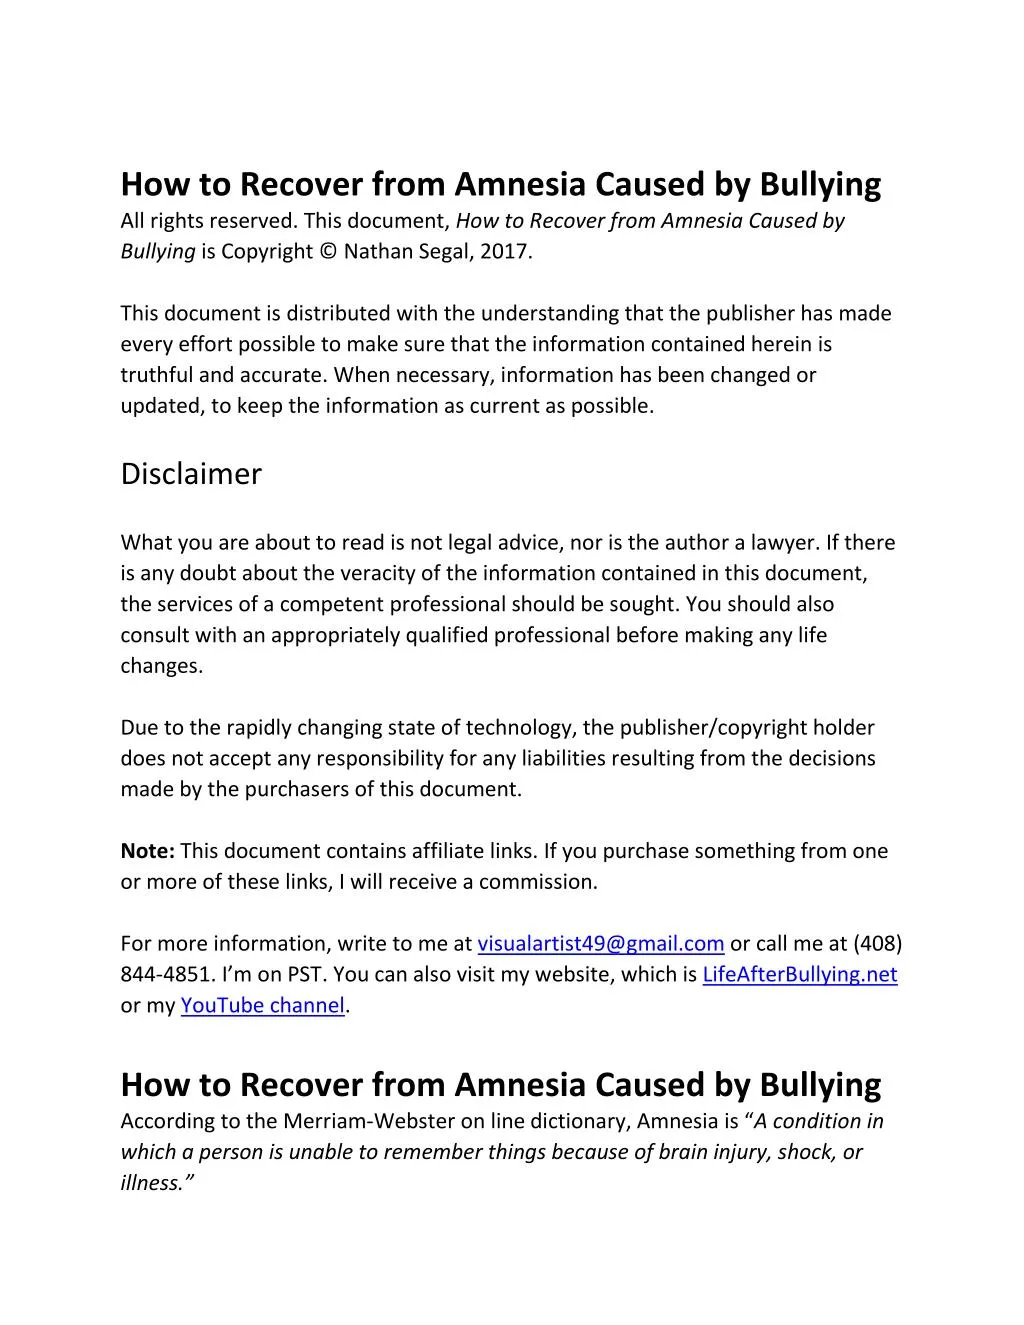 how to recover from amnesia caused by bullying